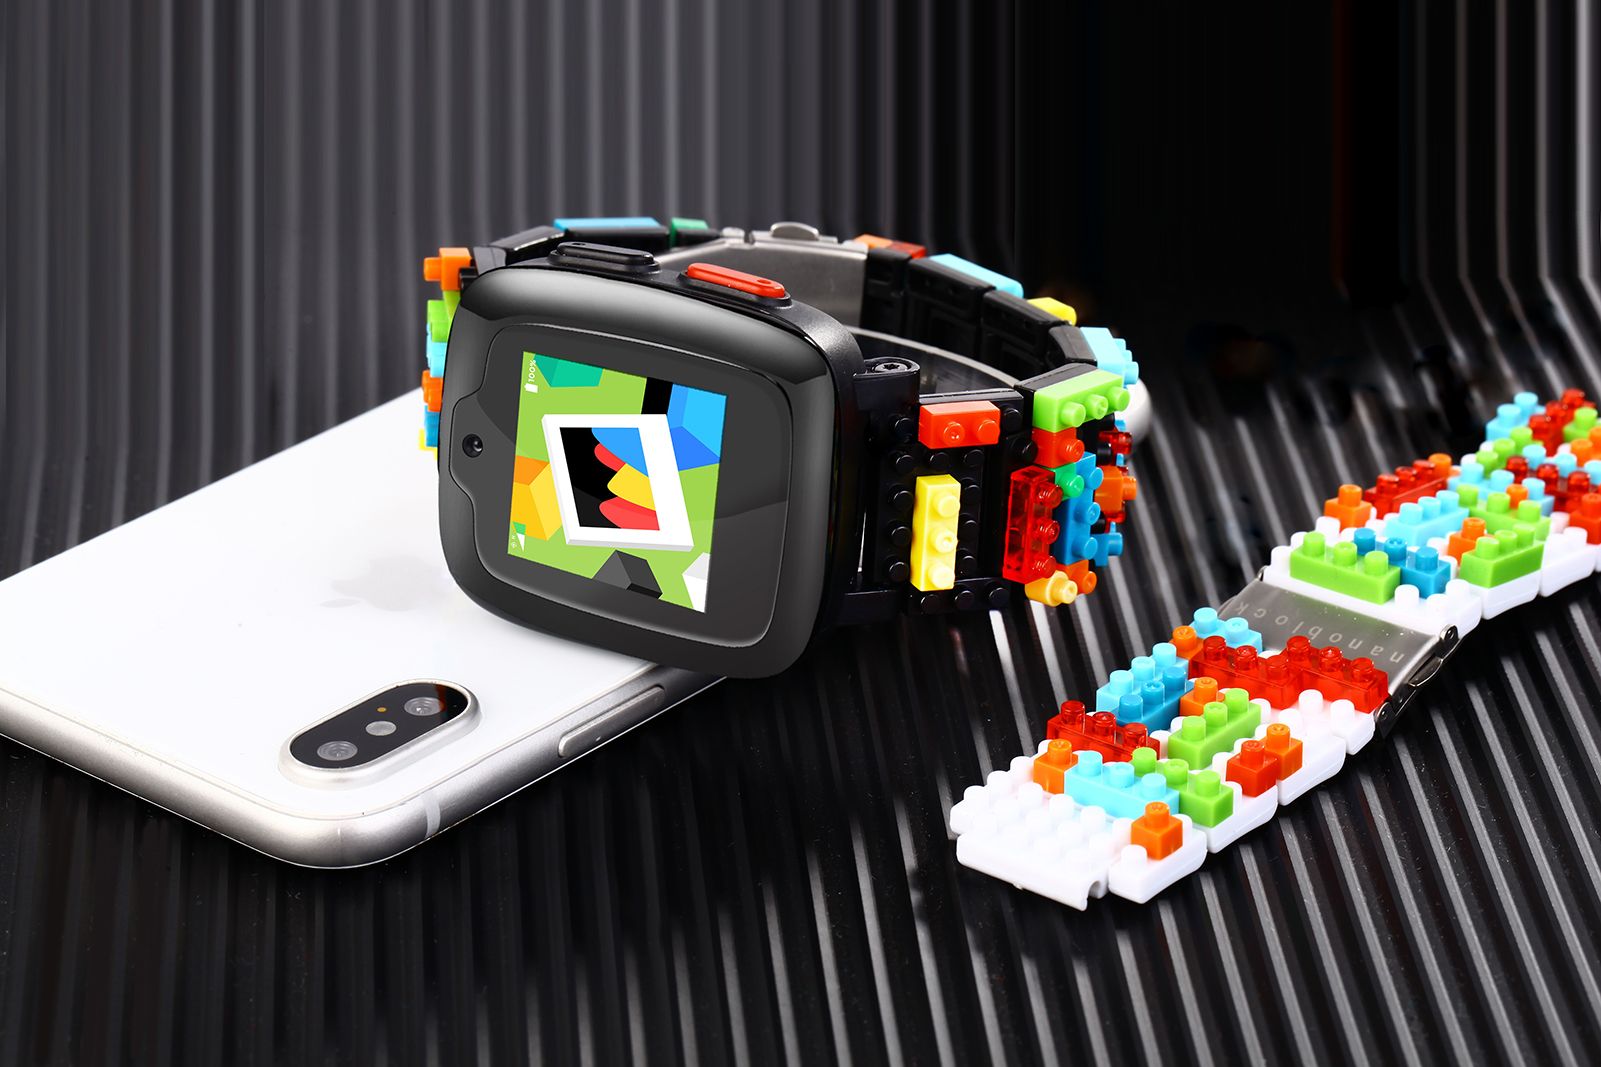 Omate X Nanoblock is a Lego-inspired smartwatch kids will really want image 1